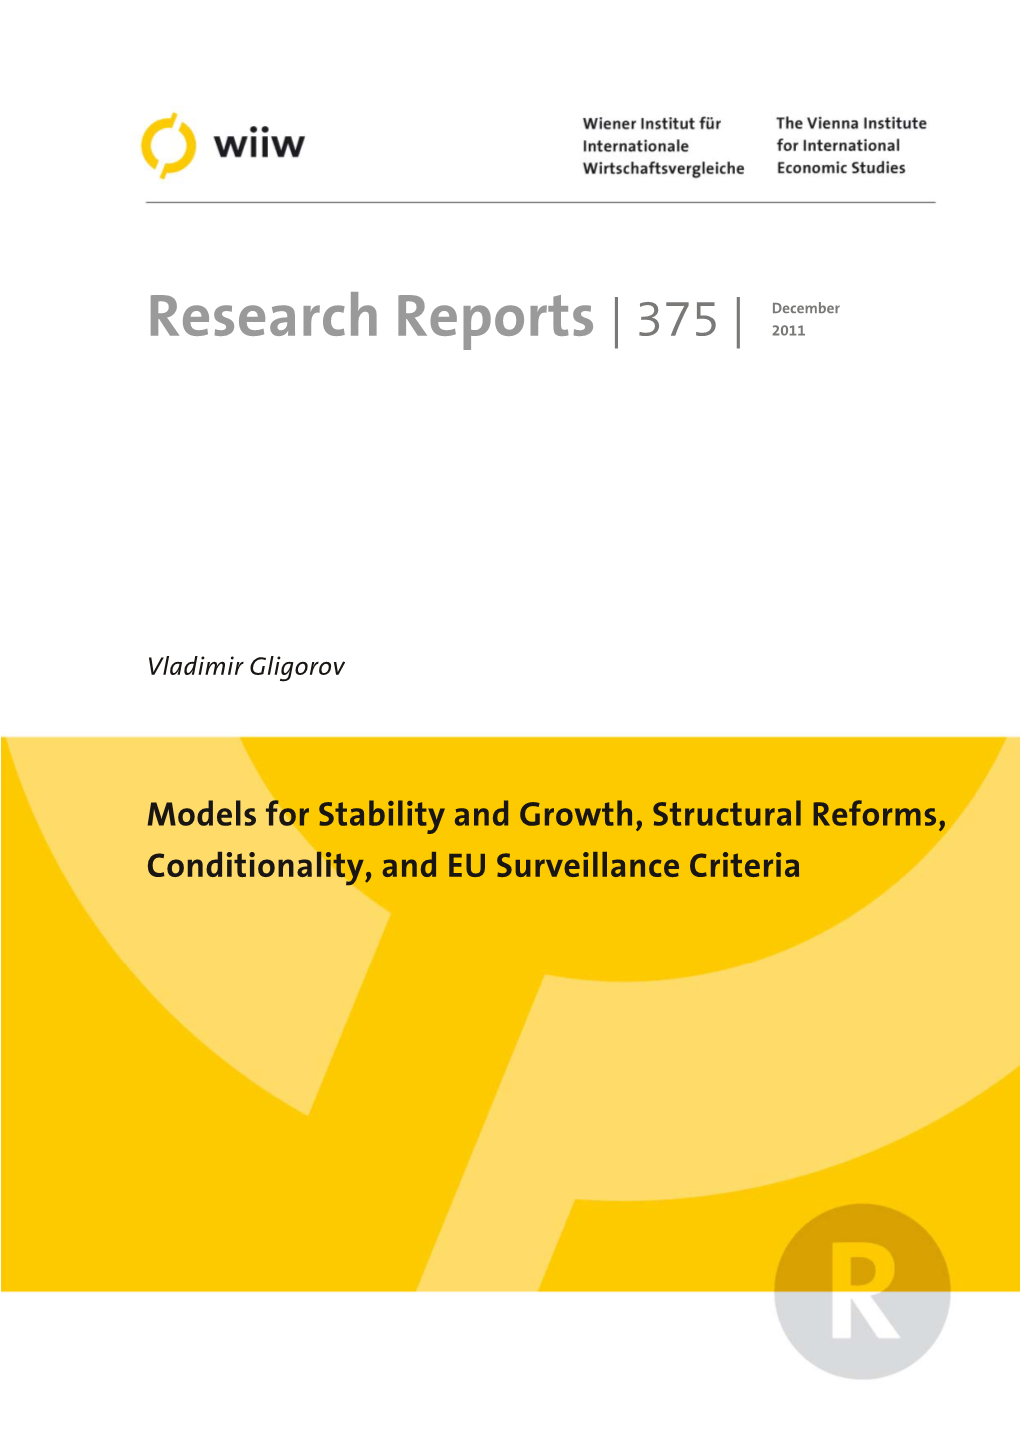 Models for Stability and Growth, Structural Reforms, Conditionality, and EU Surveillance Criteria